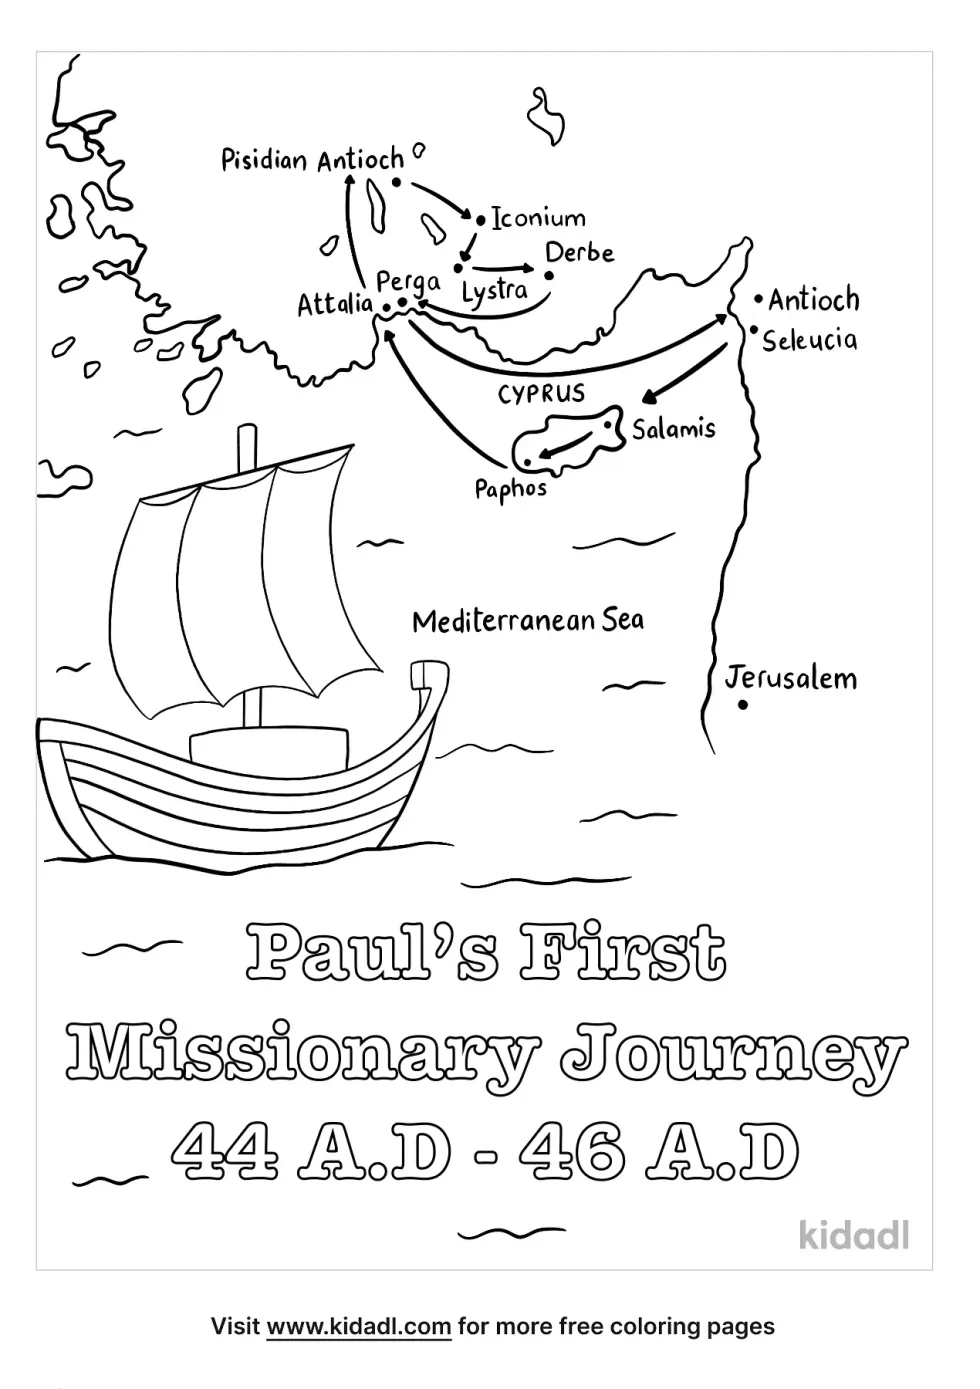 Paul's First Missionary Journey Coloring Page